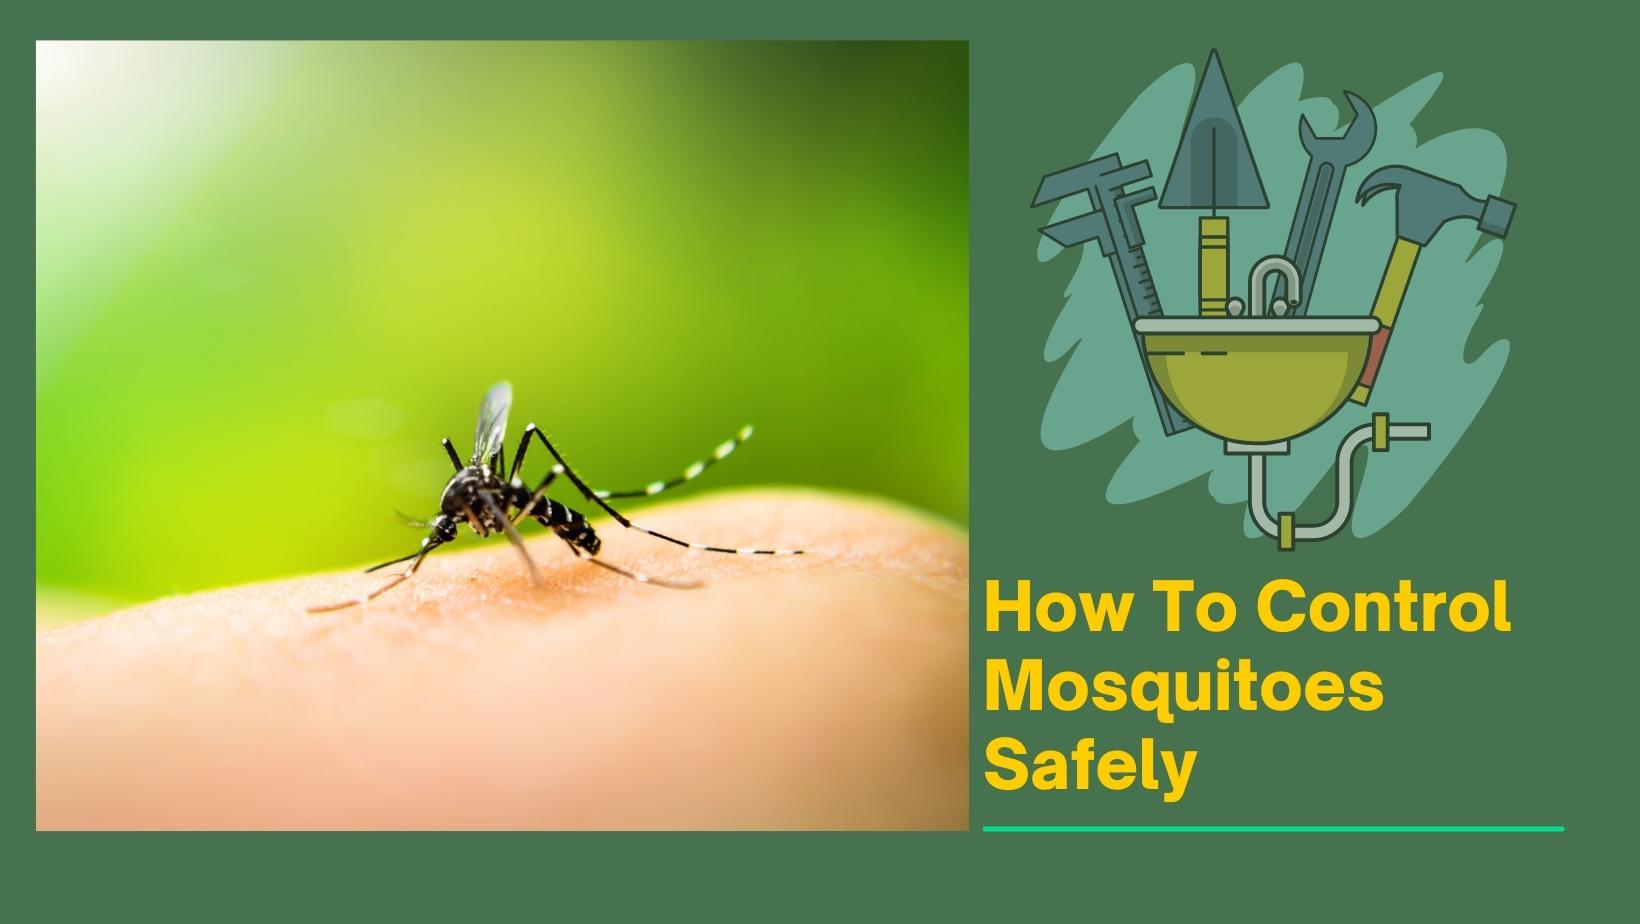 How To Control Mosquitoes Safely